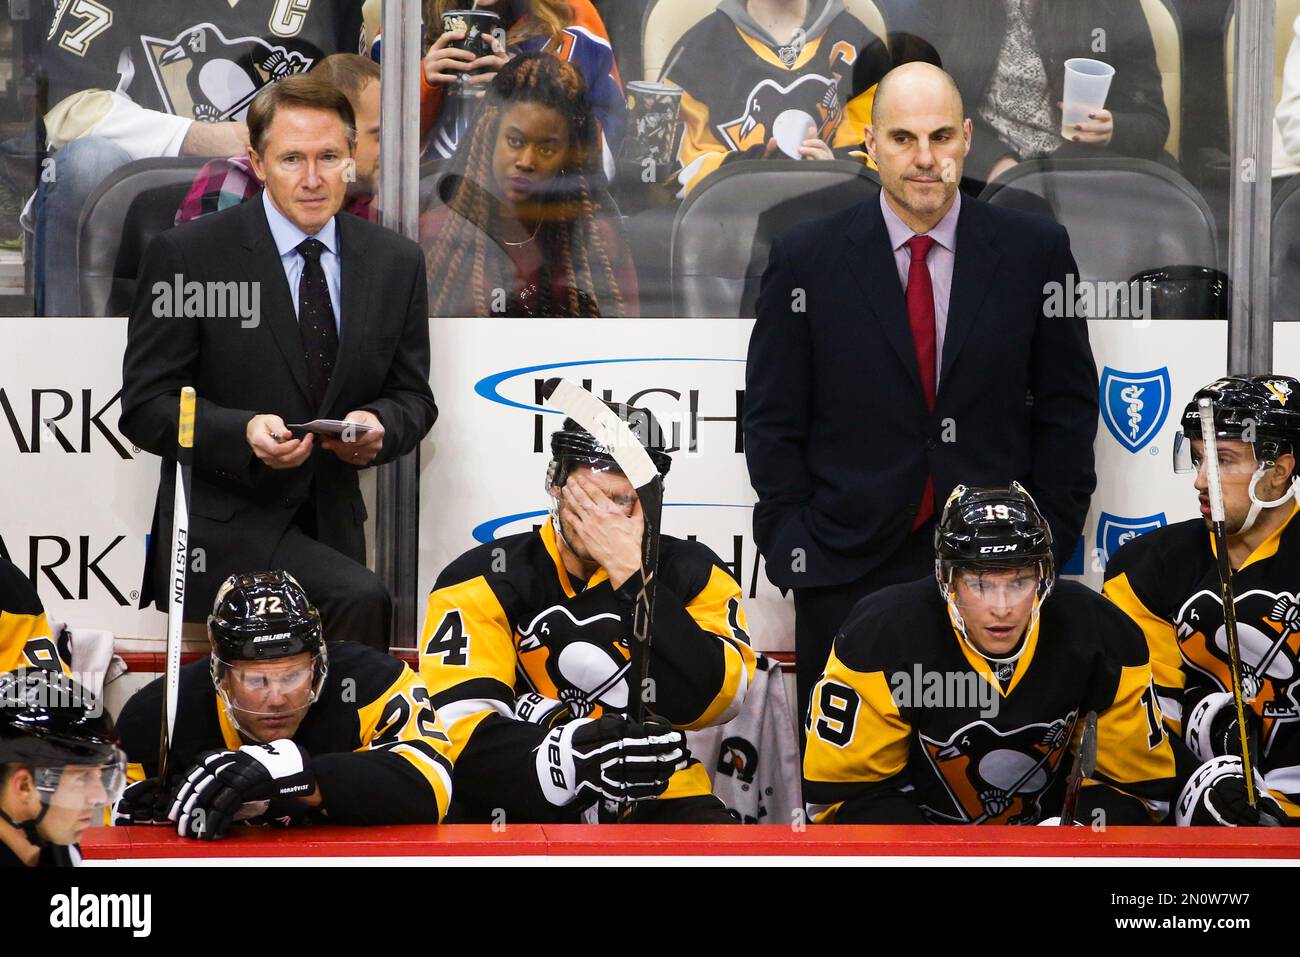 Pittsburgh Penguins - Penguins alumnus, Rick Tocchet, has been named the  Assistant Coach of the Pens. Head Coach Mike Johnston will look to add one  more assistant coach to his staff. Full